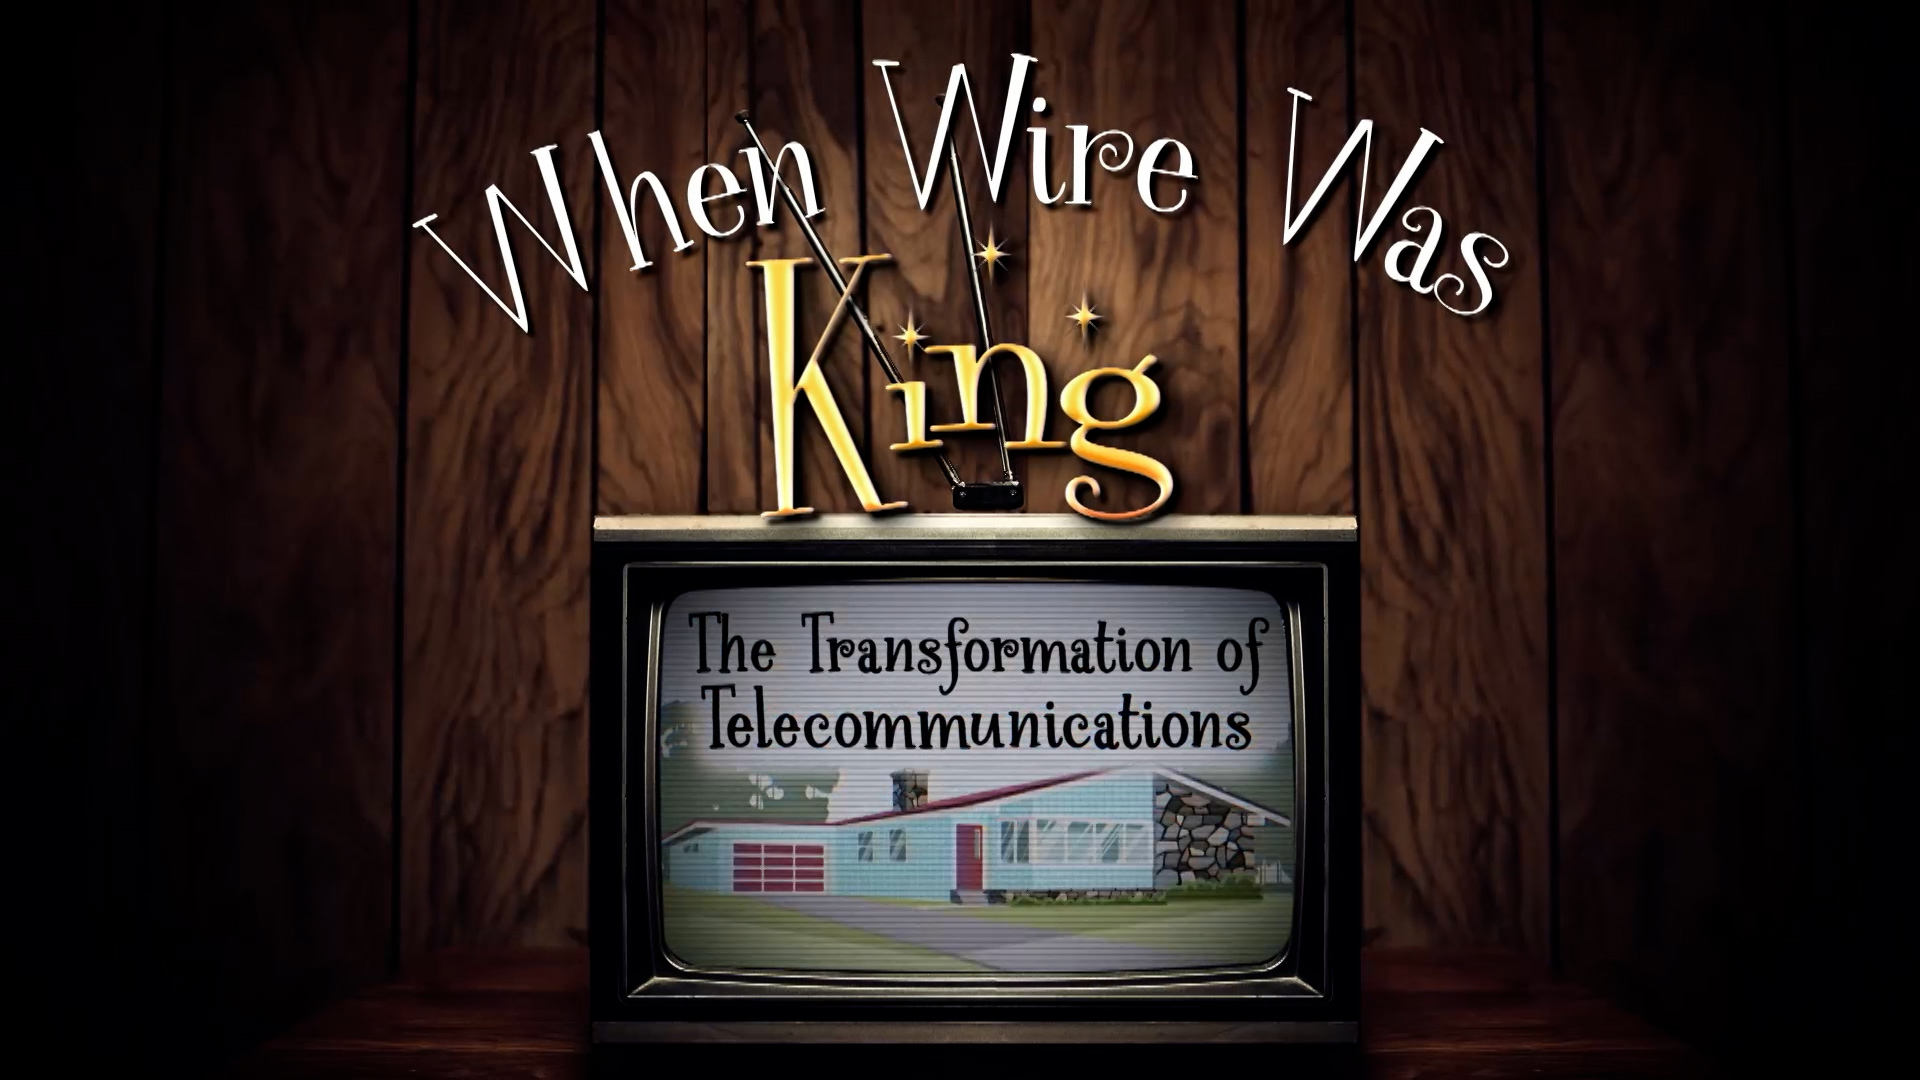 WHEN WIRE WAS KING: THE TRANSFORMATION OF COMMUNICATIONS - The little-known story of how innovation, politics, and visionary people came together to break up AT&T, the world’s largest monopoly, starting a telecommunications revolution.